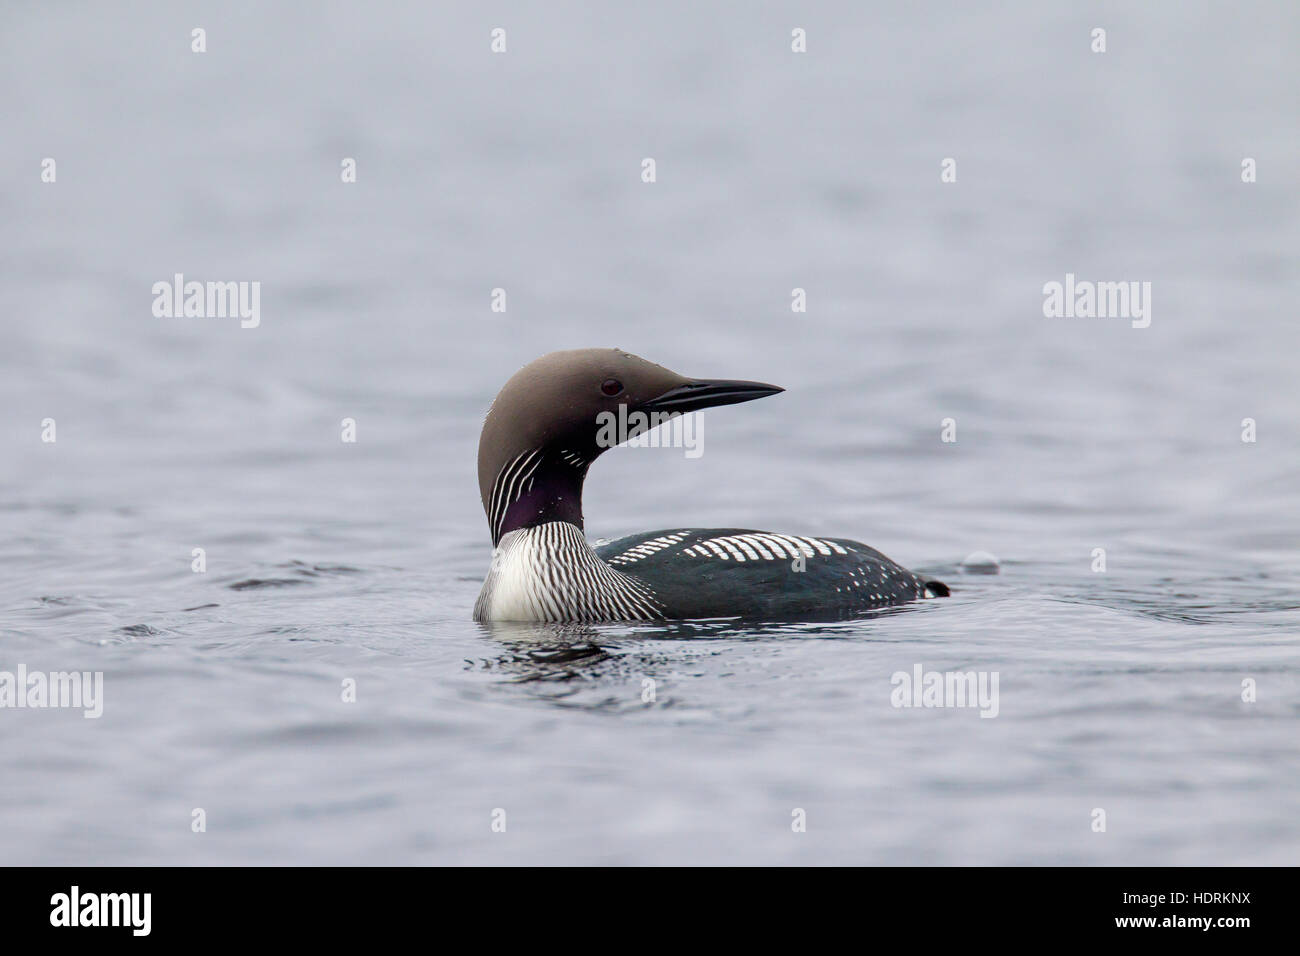 Black-throated loon / Arctic loon / black-throated diver (Gavia arctica) in breeding plumage swimming in lake in spring Stock Photo